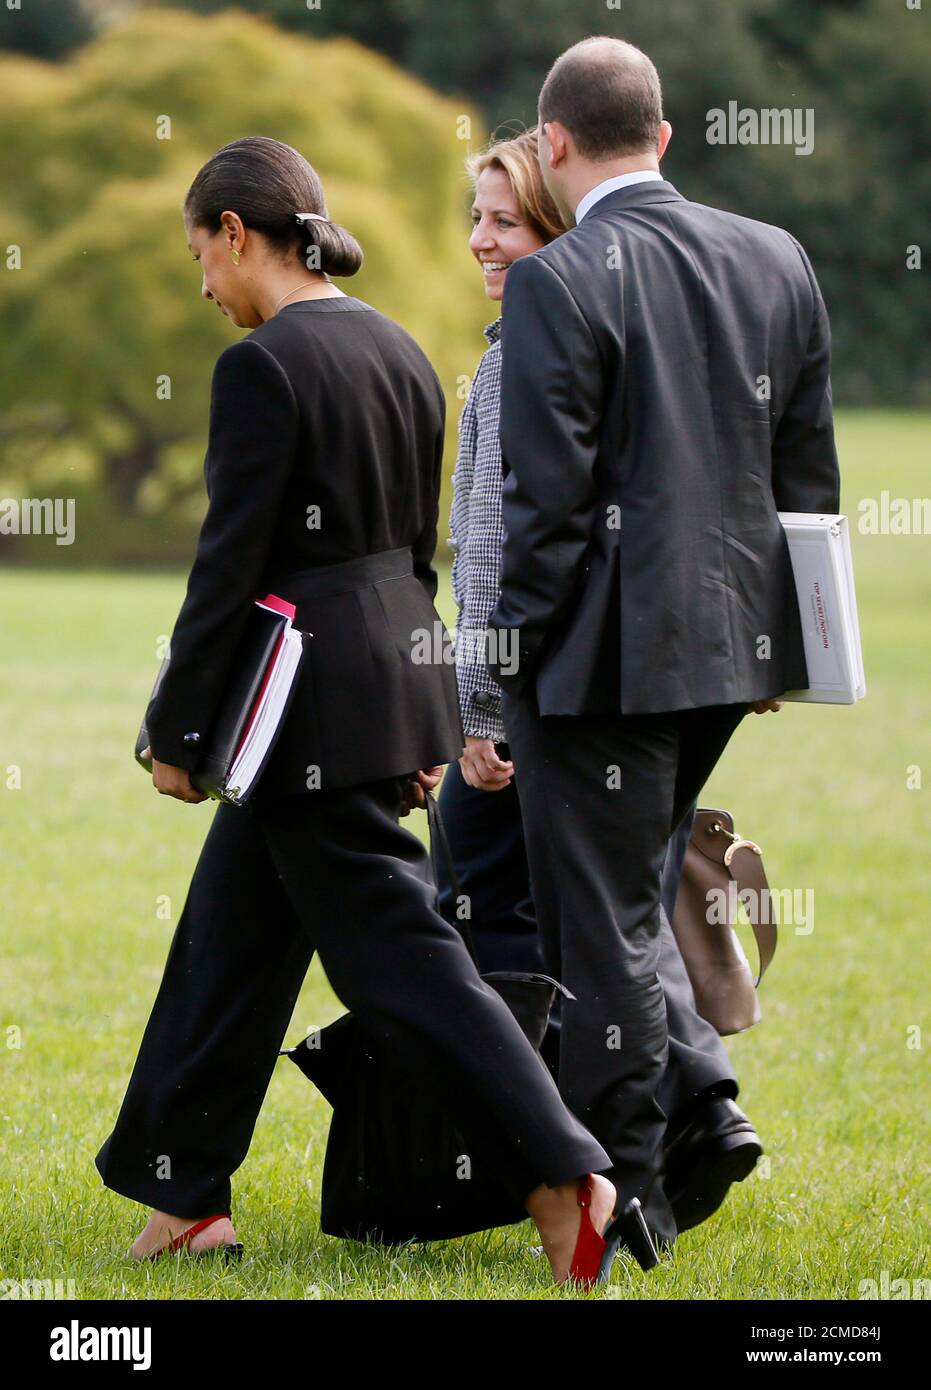 White House counter-terrorism adviser Lisa Monaco (C) talks with National Security Advisor Susan Rice (L) and Deputy National Security Advisor Ben Rhodes as they head to the Marine One helicopter with President Barack Obama (not pictured) at the White House in Washington, October 14, 2014. Monaco accompanied the President to a meeting with 20 foreign defense chiefs after meeting with New York City Mayor Bill de Blasio and NY Police Commissioner William Bratton earlier in the day to discuss the threats posed by Ebola and Islamic State. REUTERS/Jim Bourg (UNITED STATES - Tags: POLITICS) Stock Photo